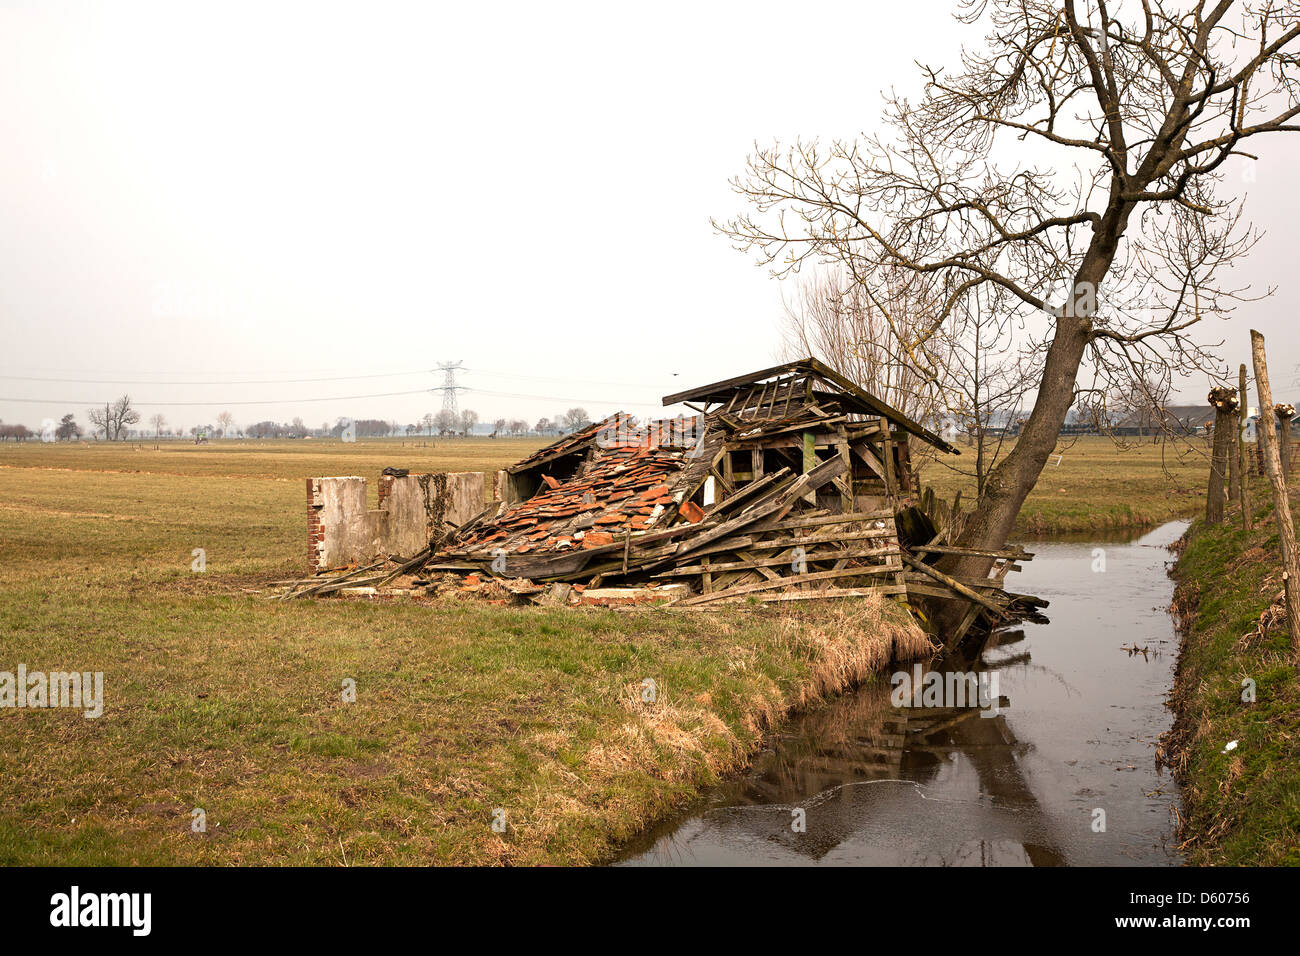 Fallen down shed, Oud-Alblas, South-Holland, Netherlands Stock Photo